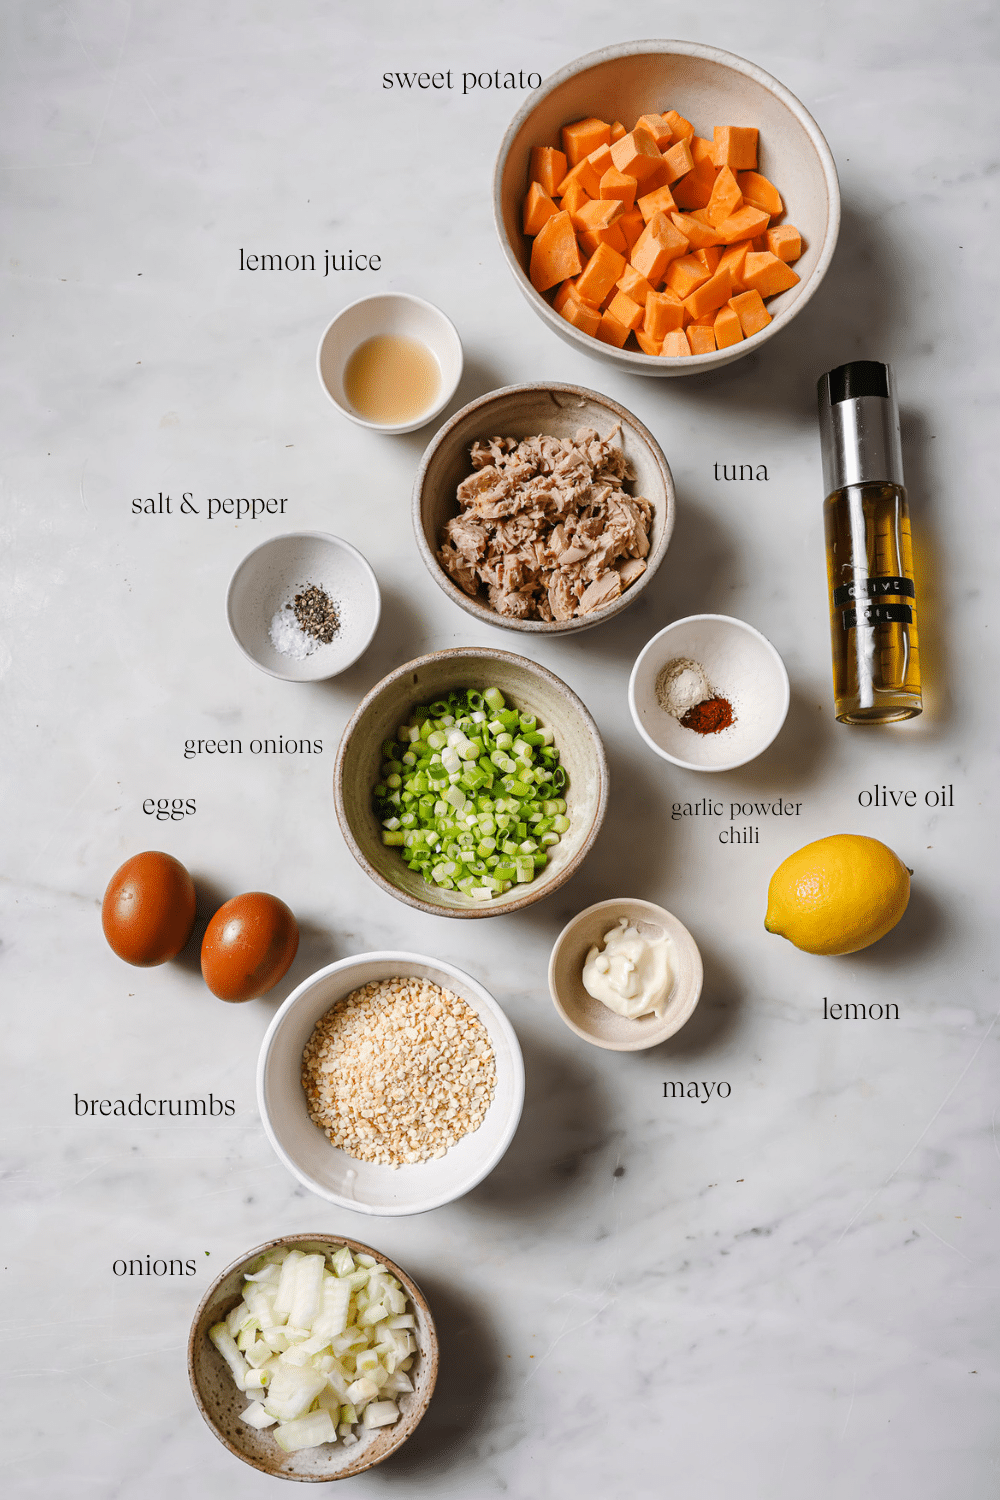 Small bowls of pre-measured ingredients.